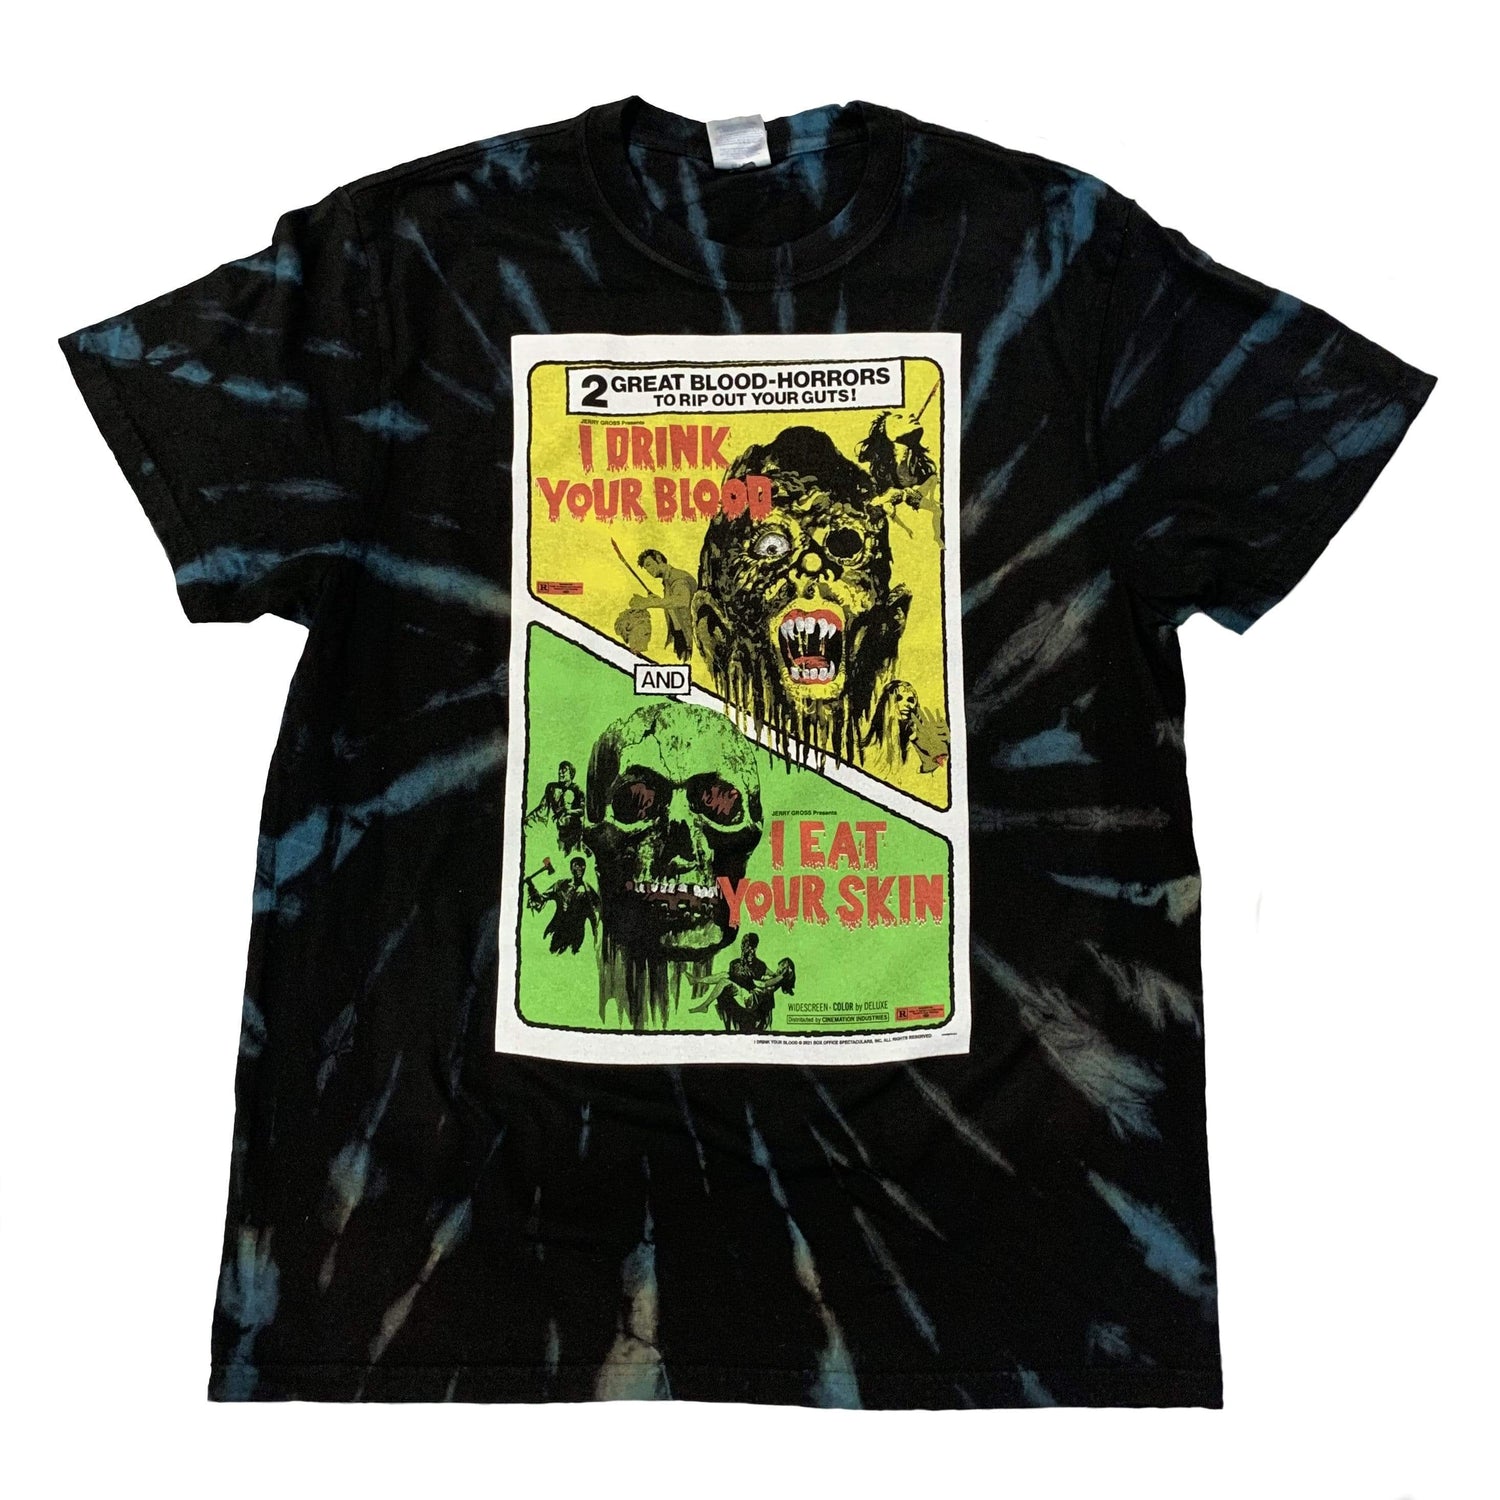 Copy of I DRINK YOUR BLOOD / I EAT YOUR SKIN Tie Dye T-shirt : Double feature one-sheet